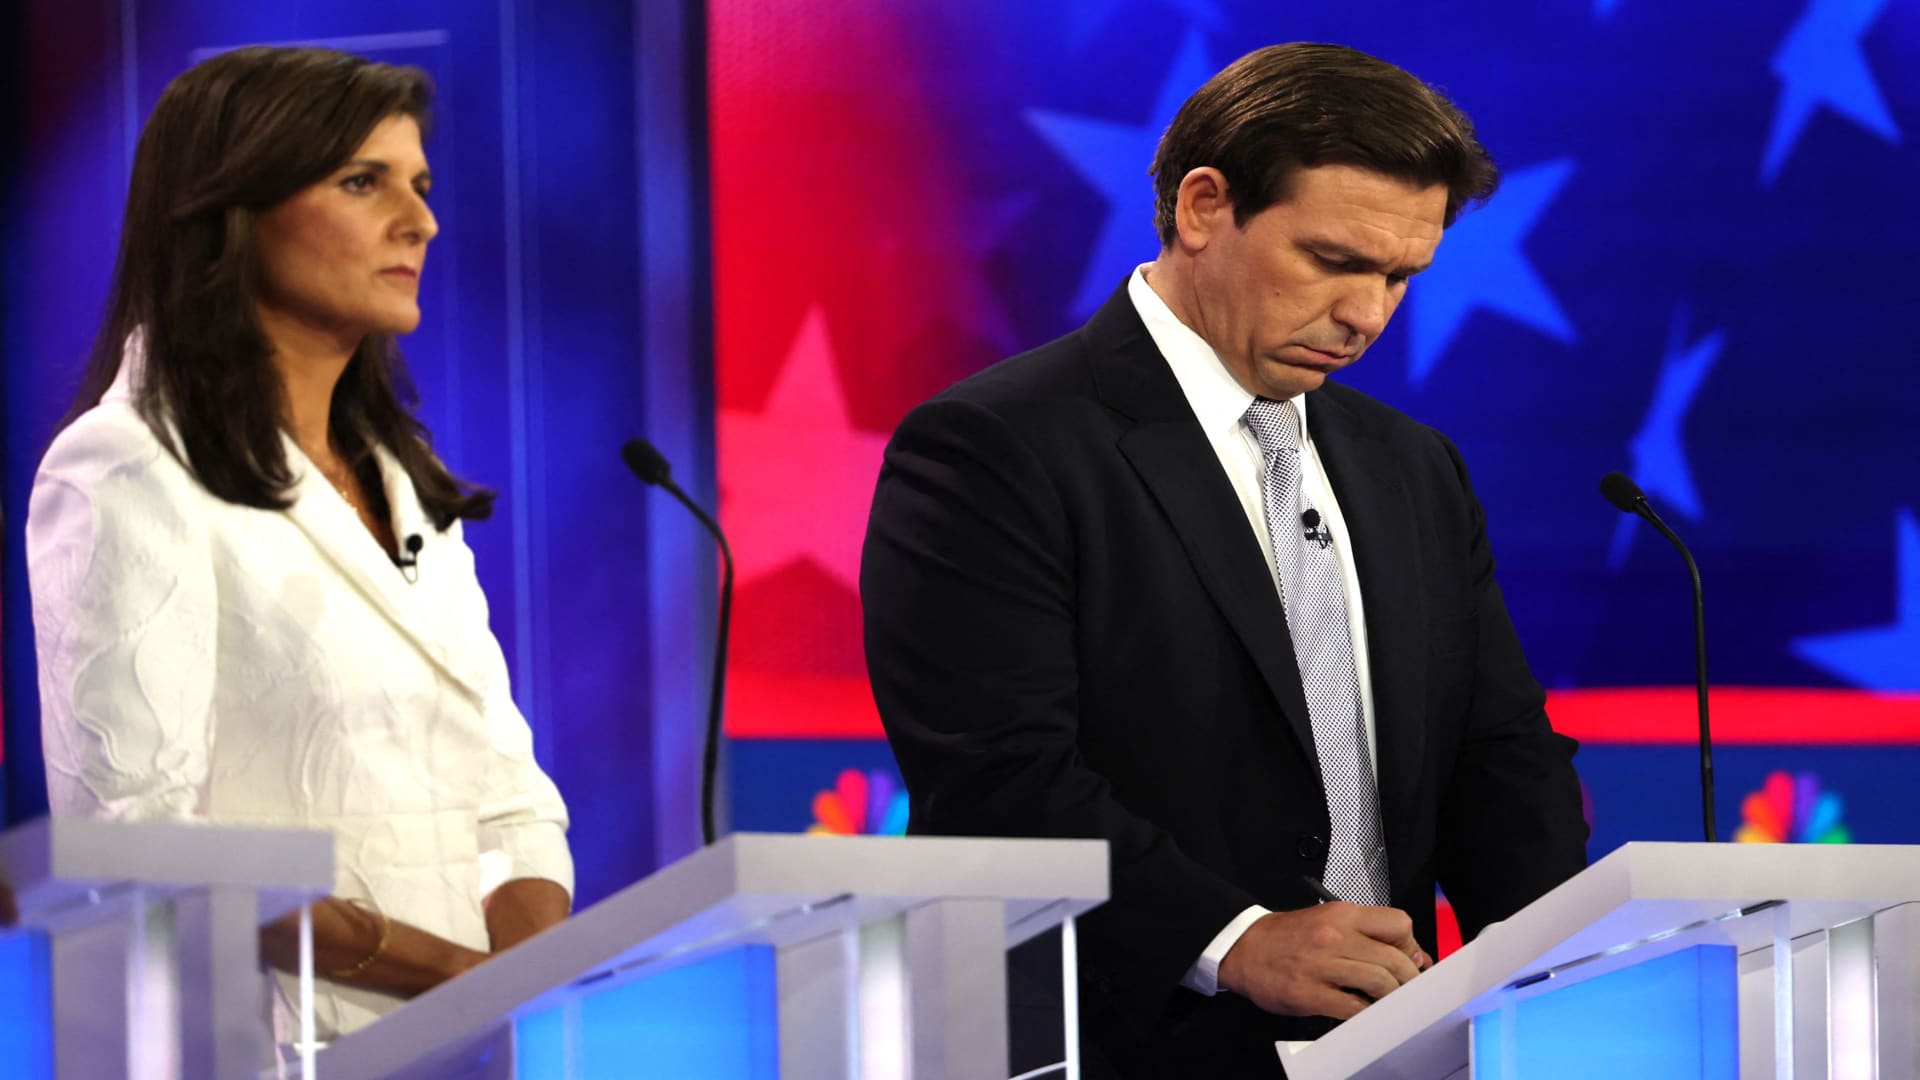 Florida Governor Ron DeSantis takes notes as former South Carolina Governor Nikki Haley looks on at the third Republican candidates' U.S. presidential debate of the 2024 U.S. presidential campaign hosted by NBC News at the Adrienne Arsht Center for the Performing Arts in Miami, Florida, U.S., November 8, 2023. 